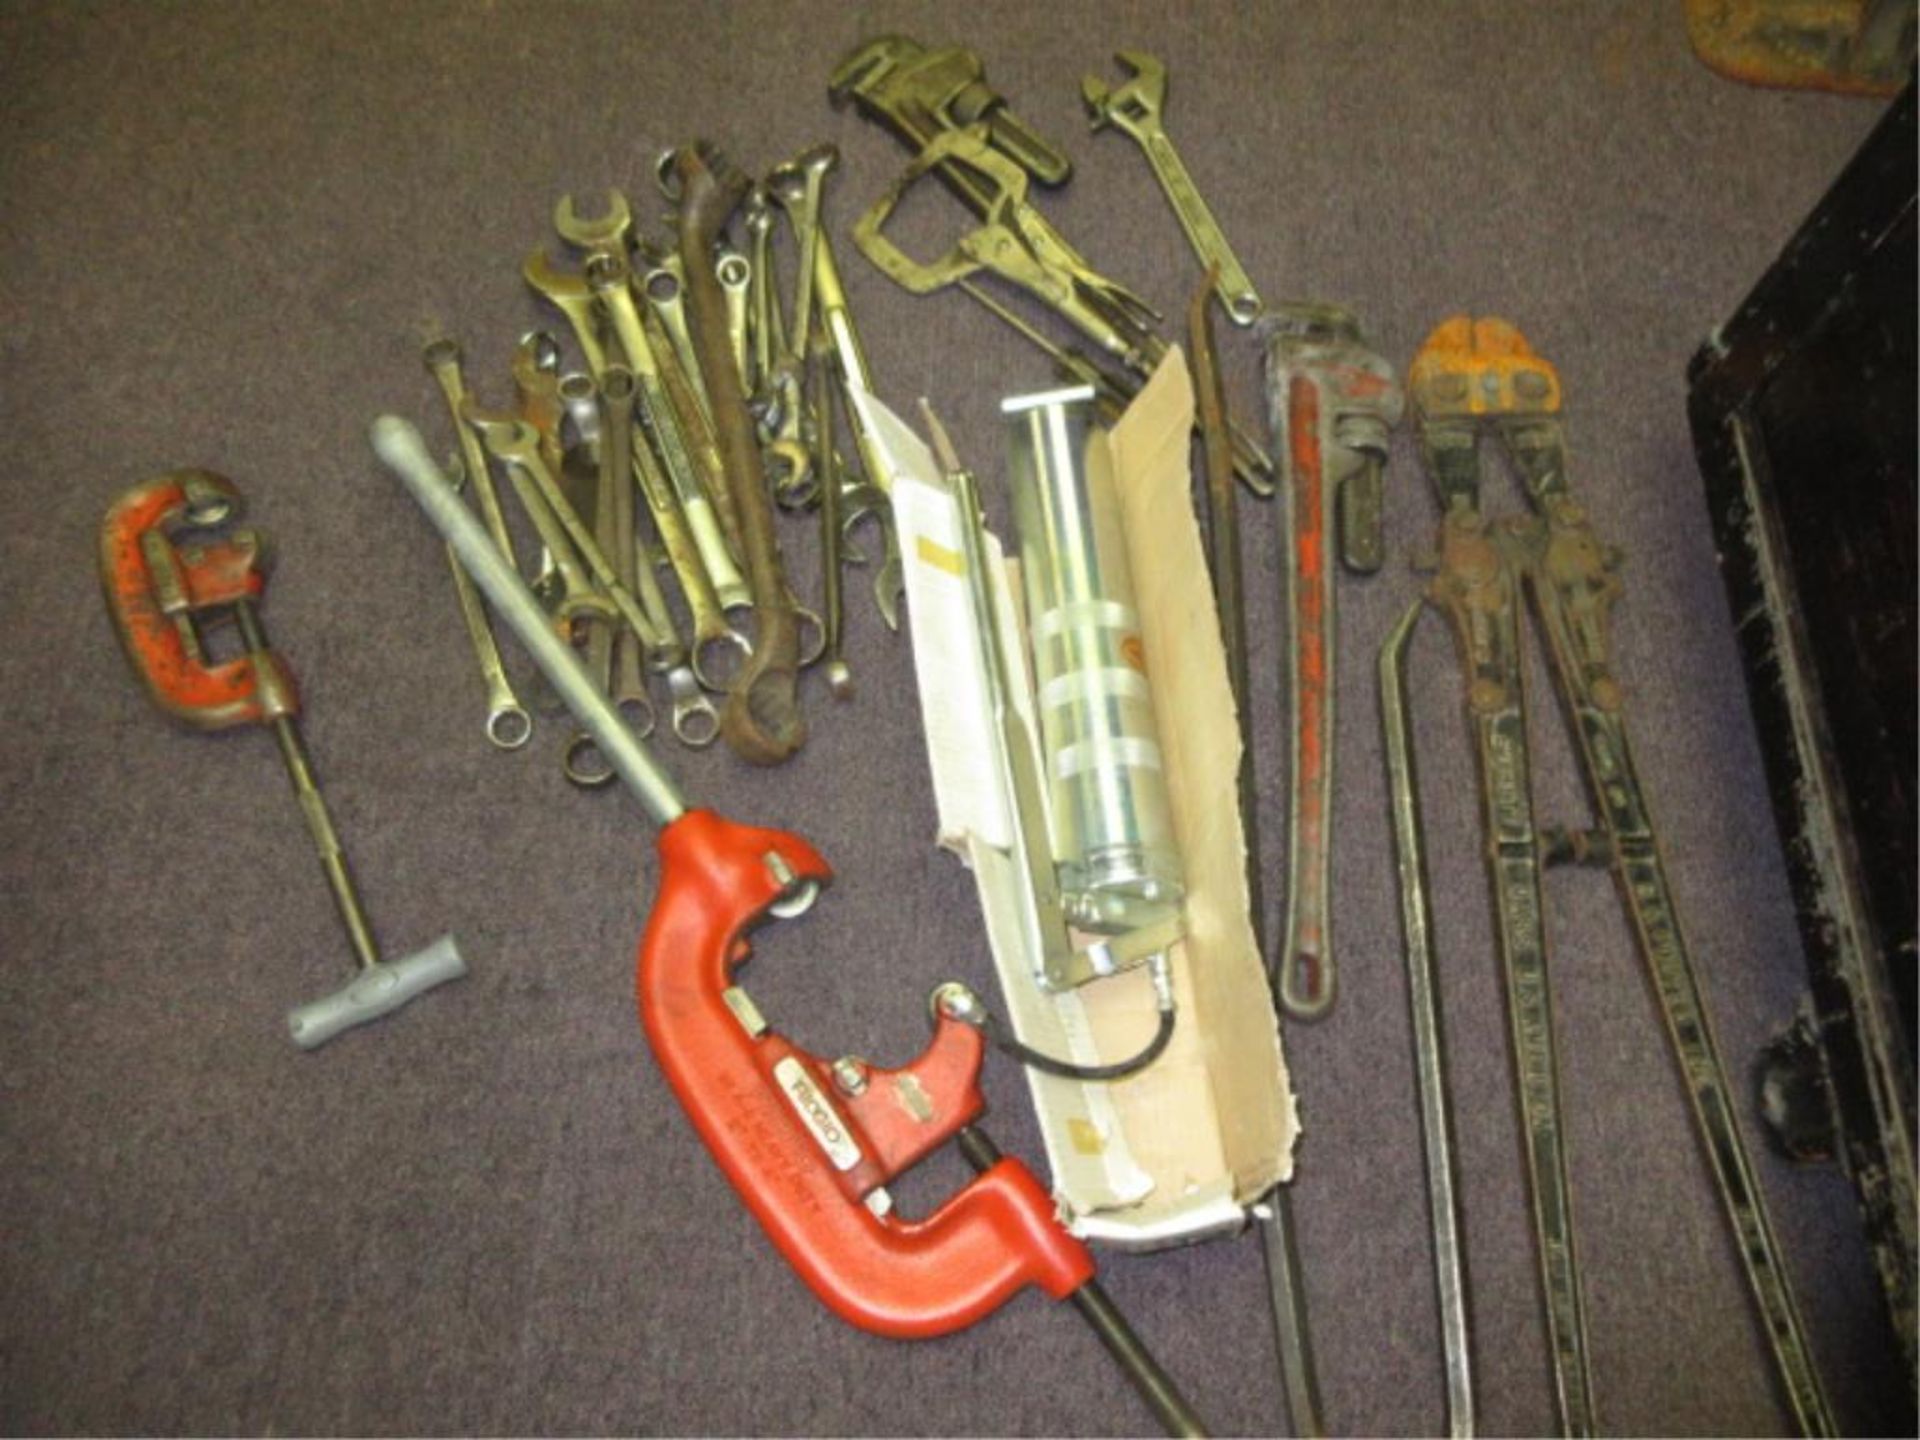 Lot (approx. 50pcs) Assorted Hand Tools, includes but not limited to: pipe wrenches, bolt cutter, - Image 3 of 3